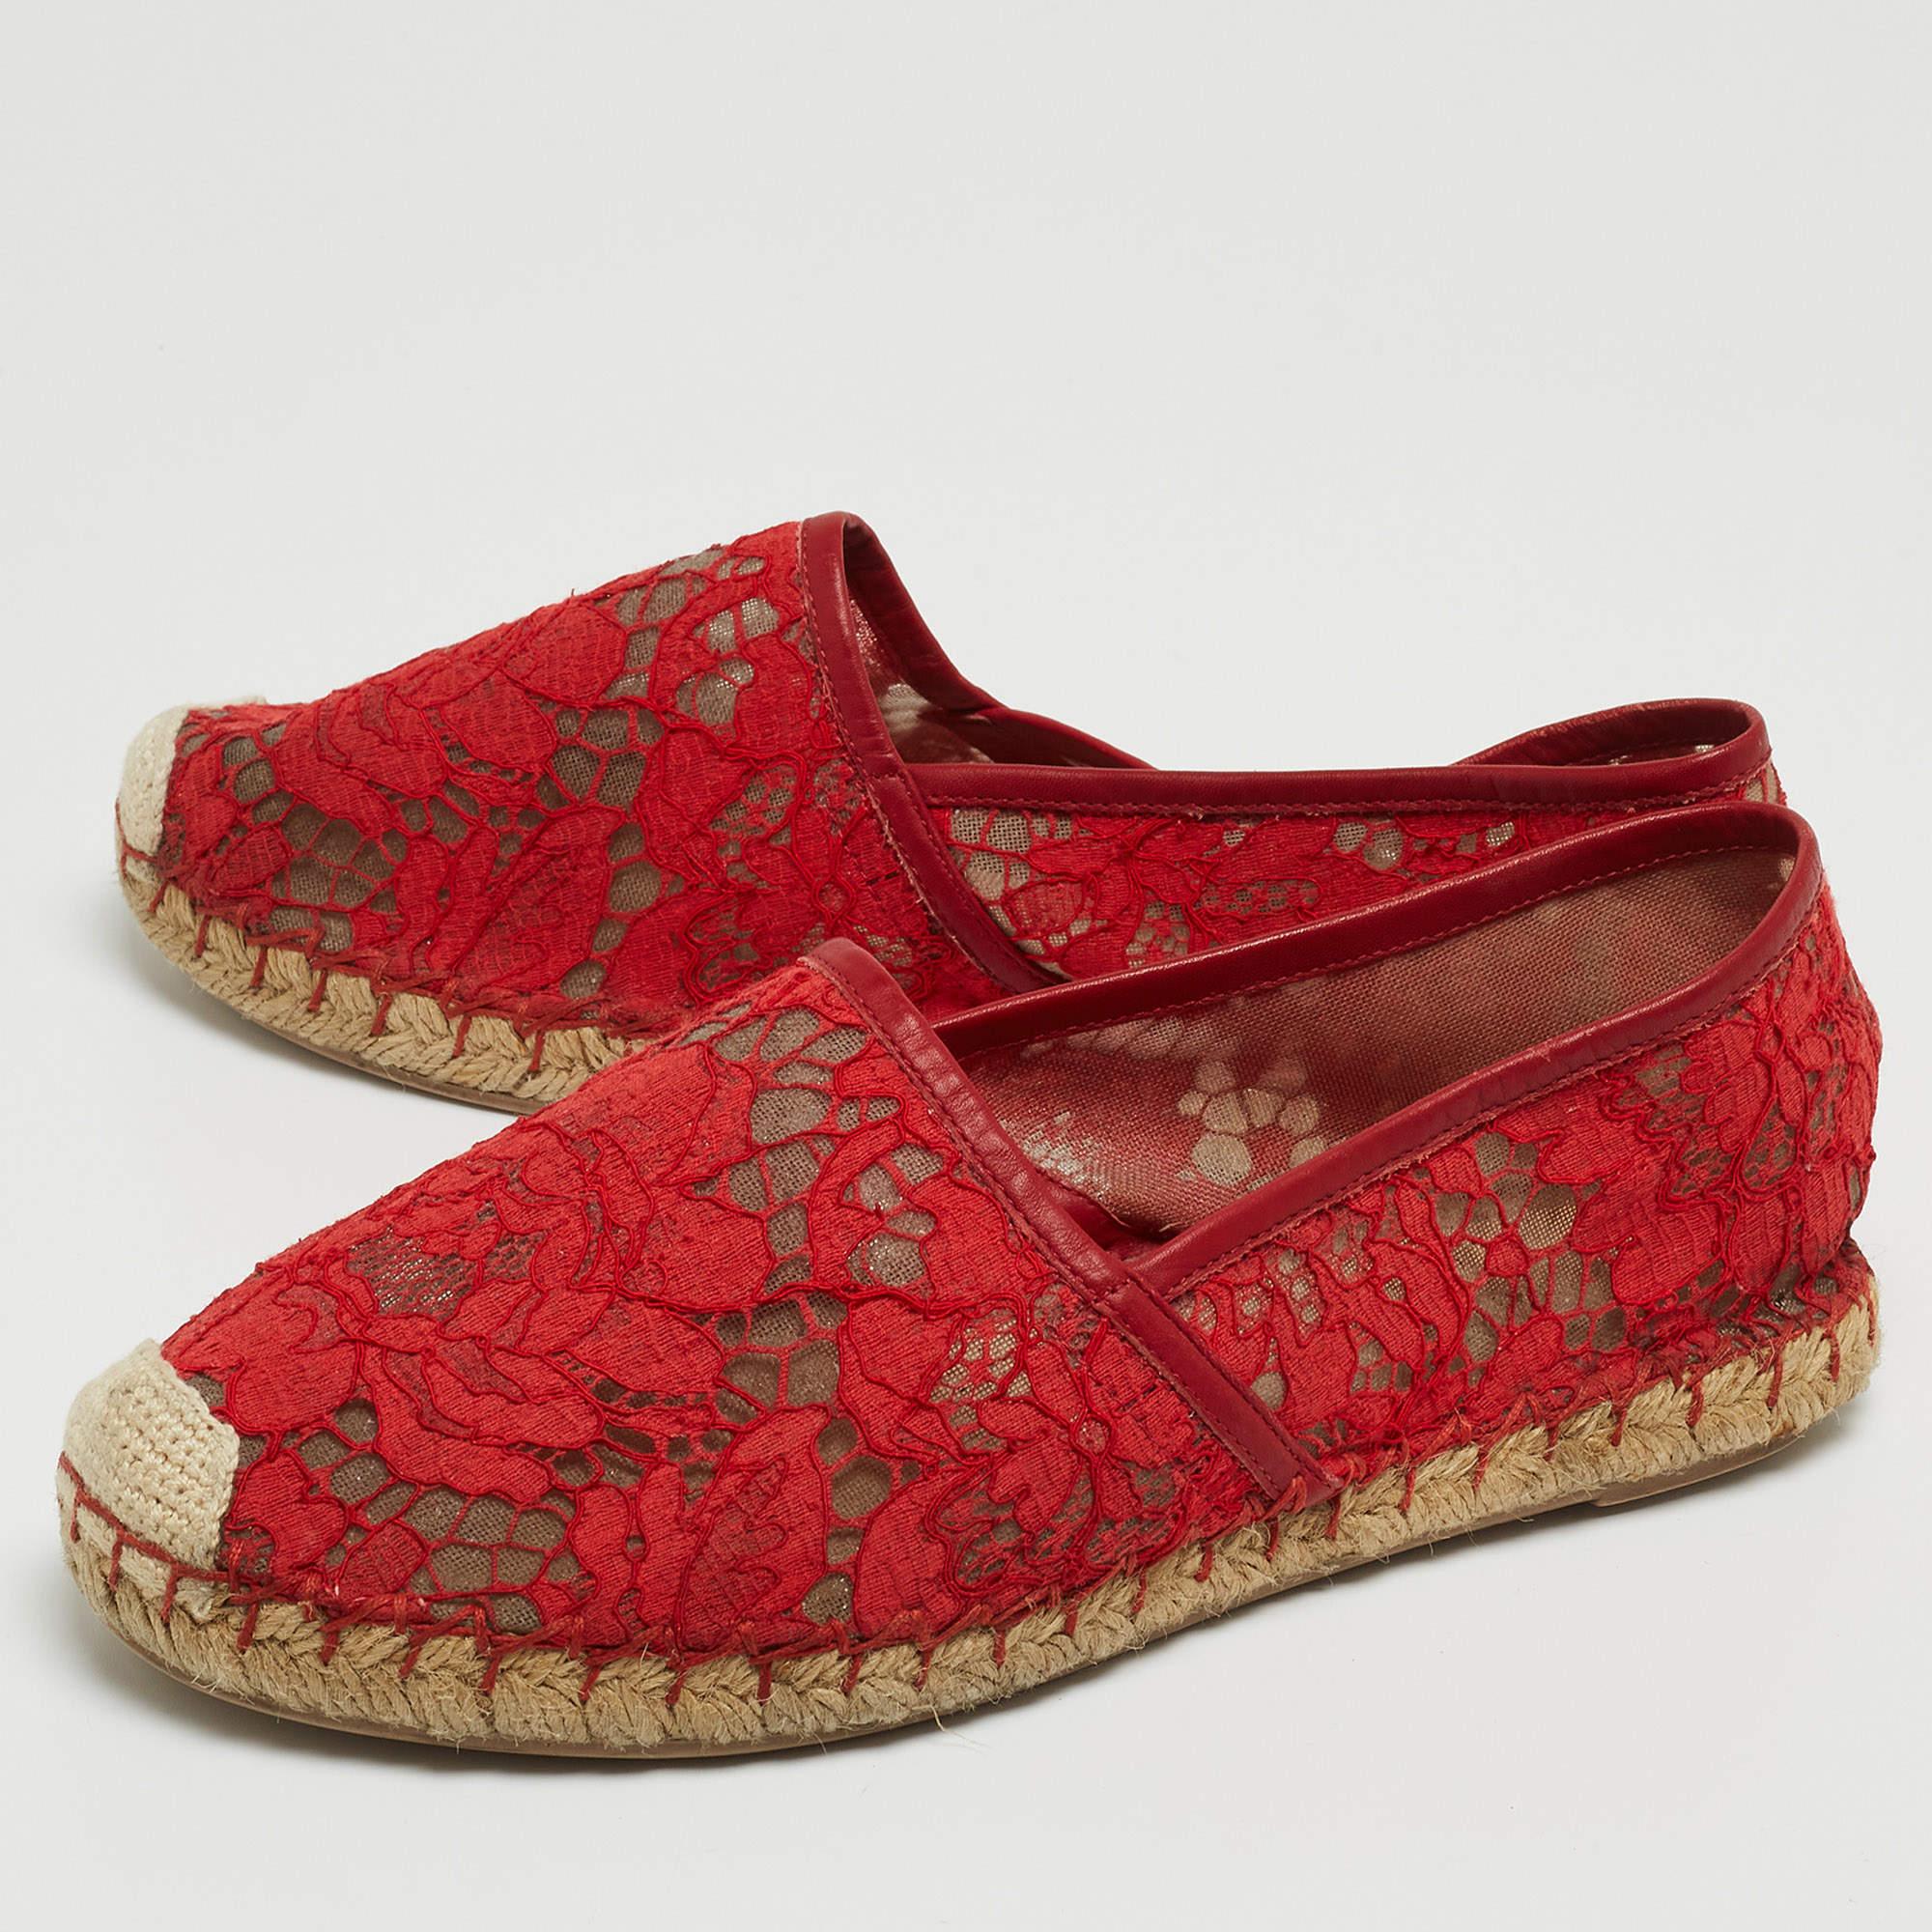 Women's Valentino Red Lace Espadrille Flats Size 38